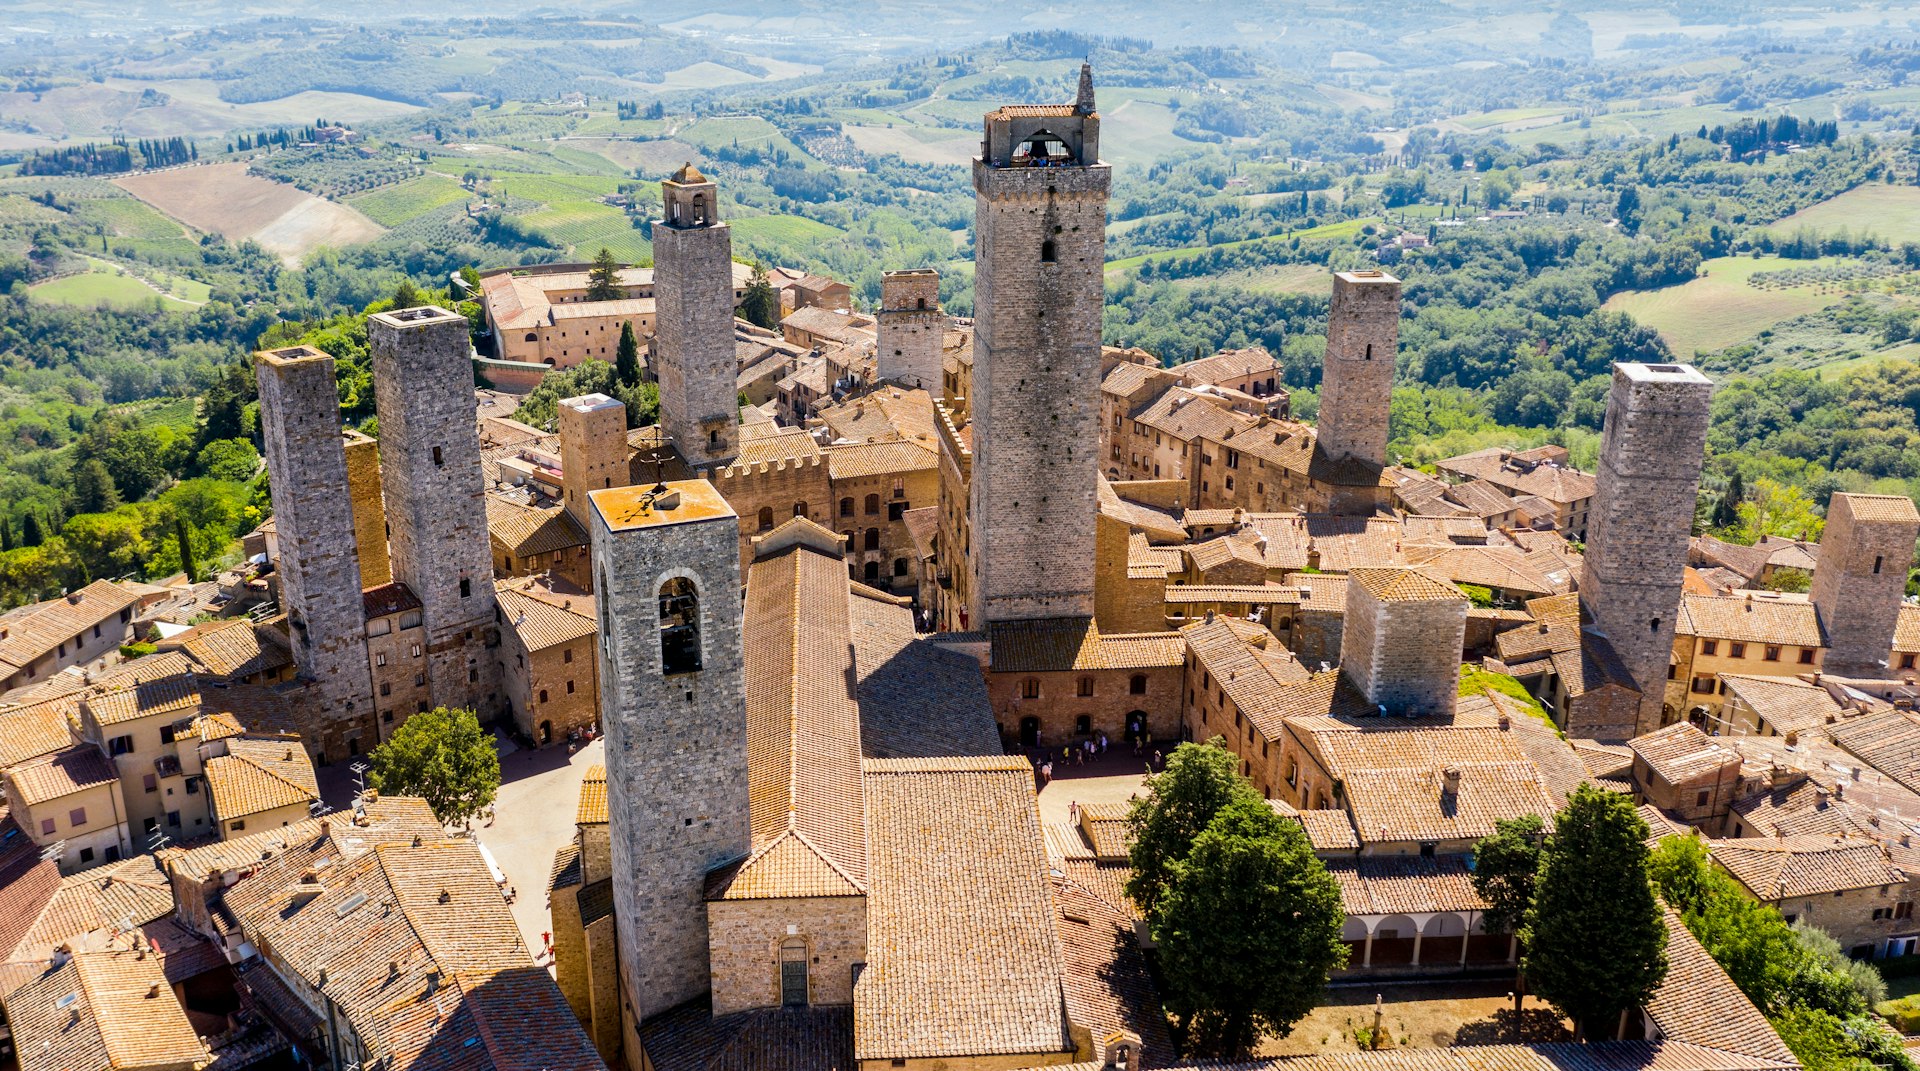 Aerial of the medieval town of San Gimignano, with 10 distinctive stone towers rising above the town